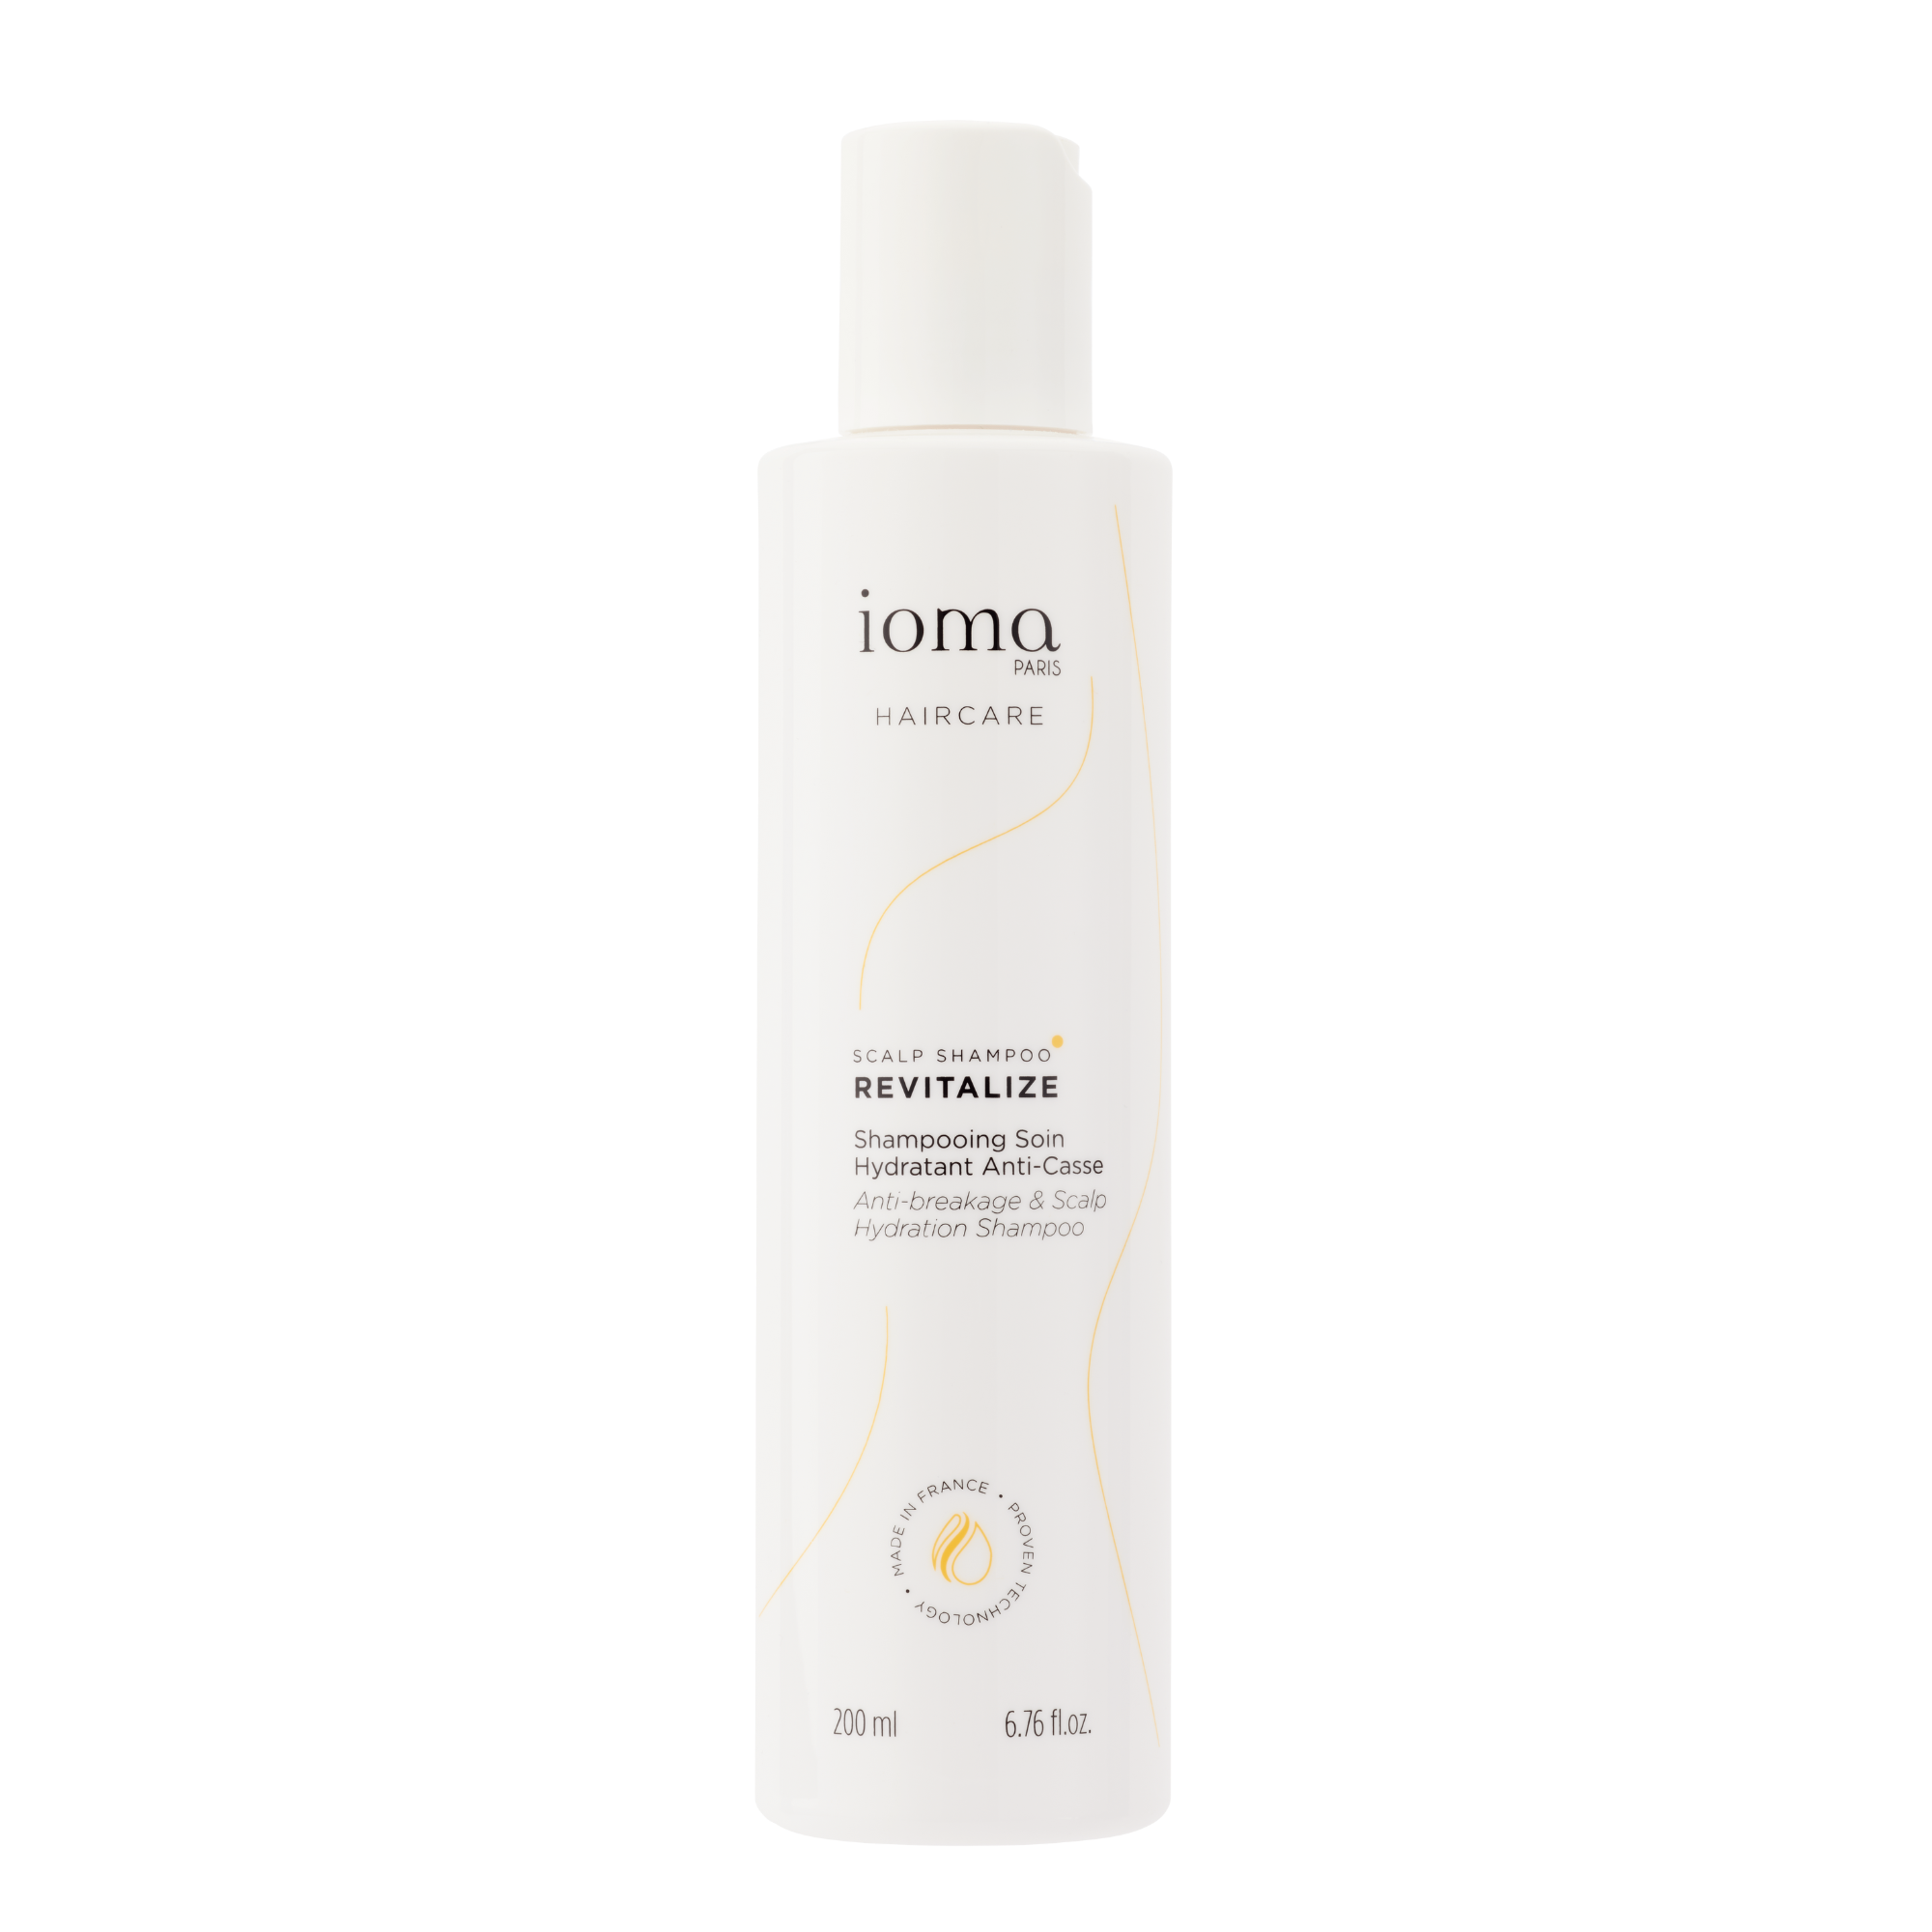 Shampooing Soin Hydratant Anti-Casse